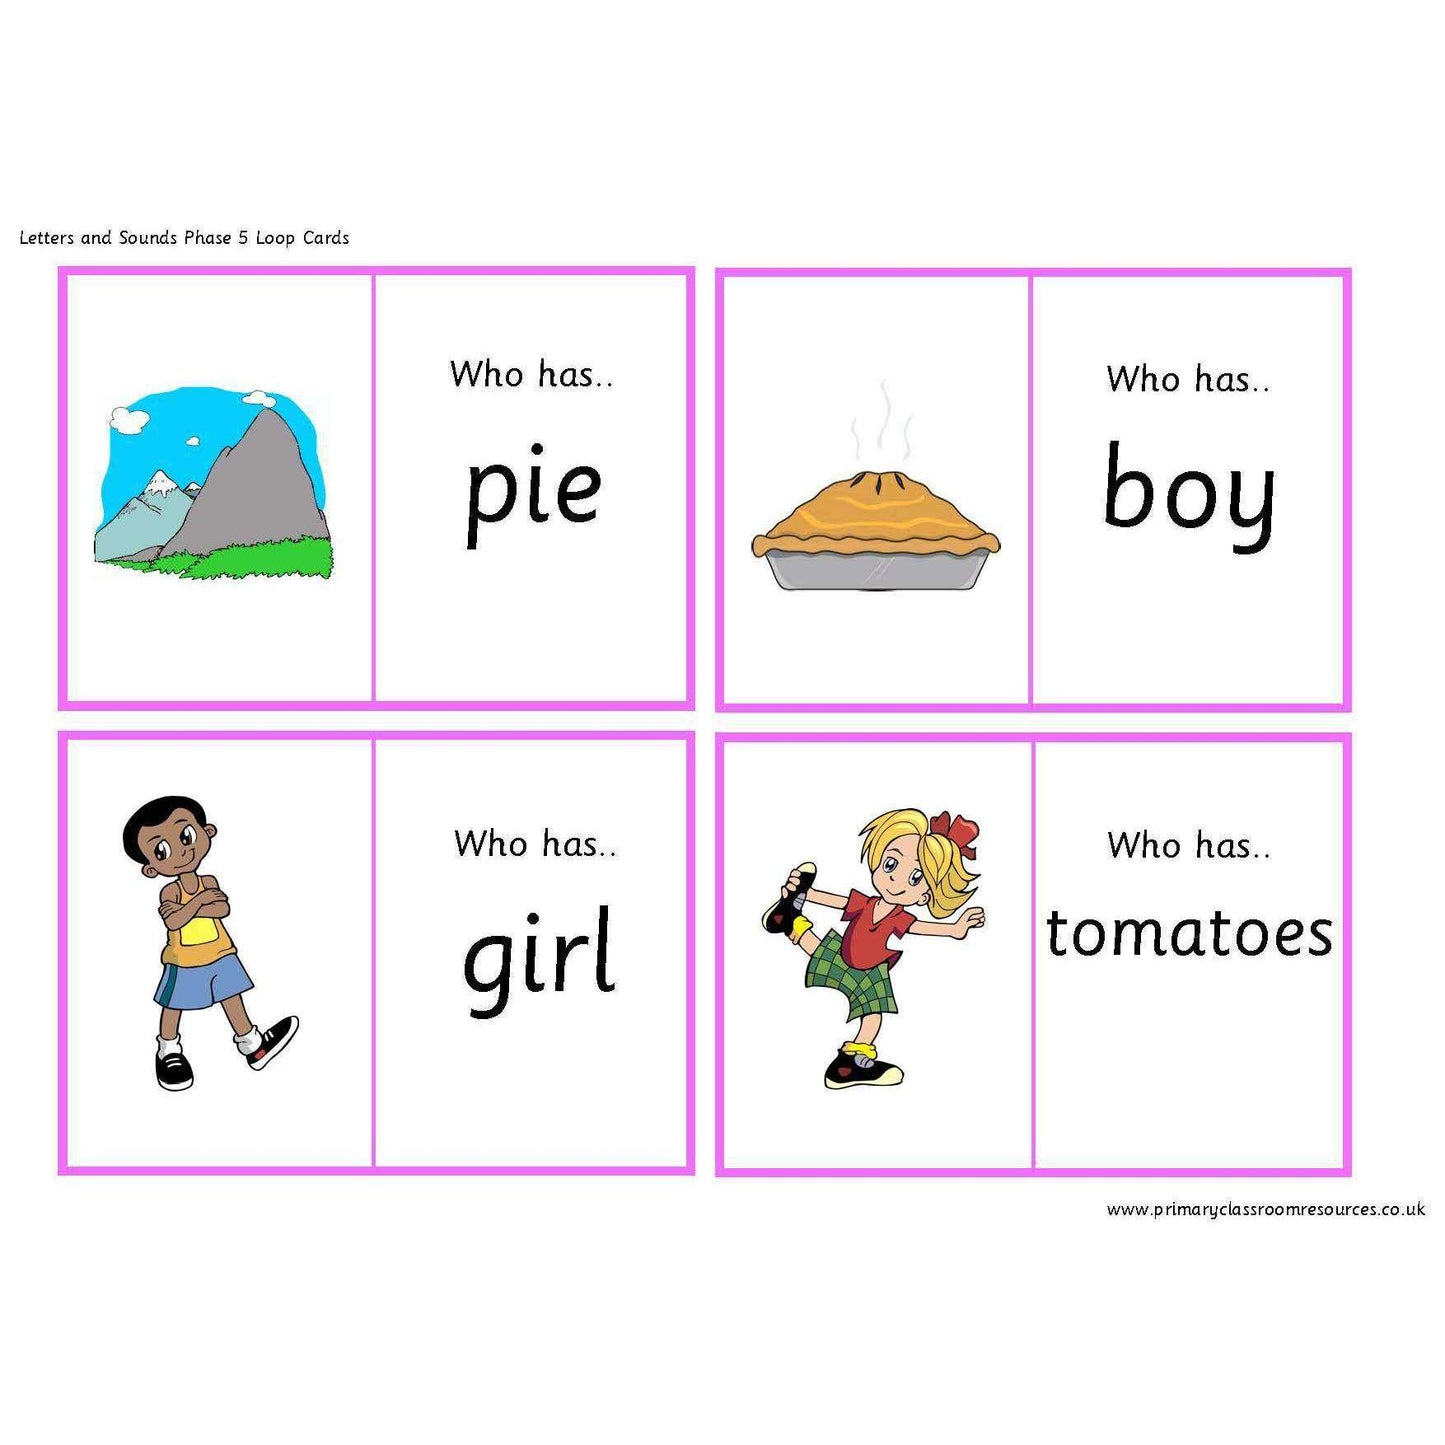 Letters and Sounds Phase 5 Loop Cards:Primary Classroom Resources